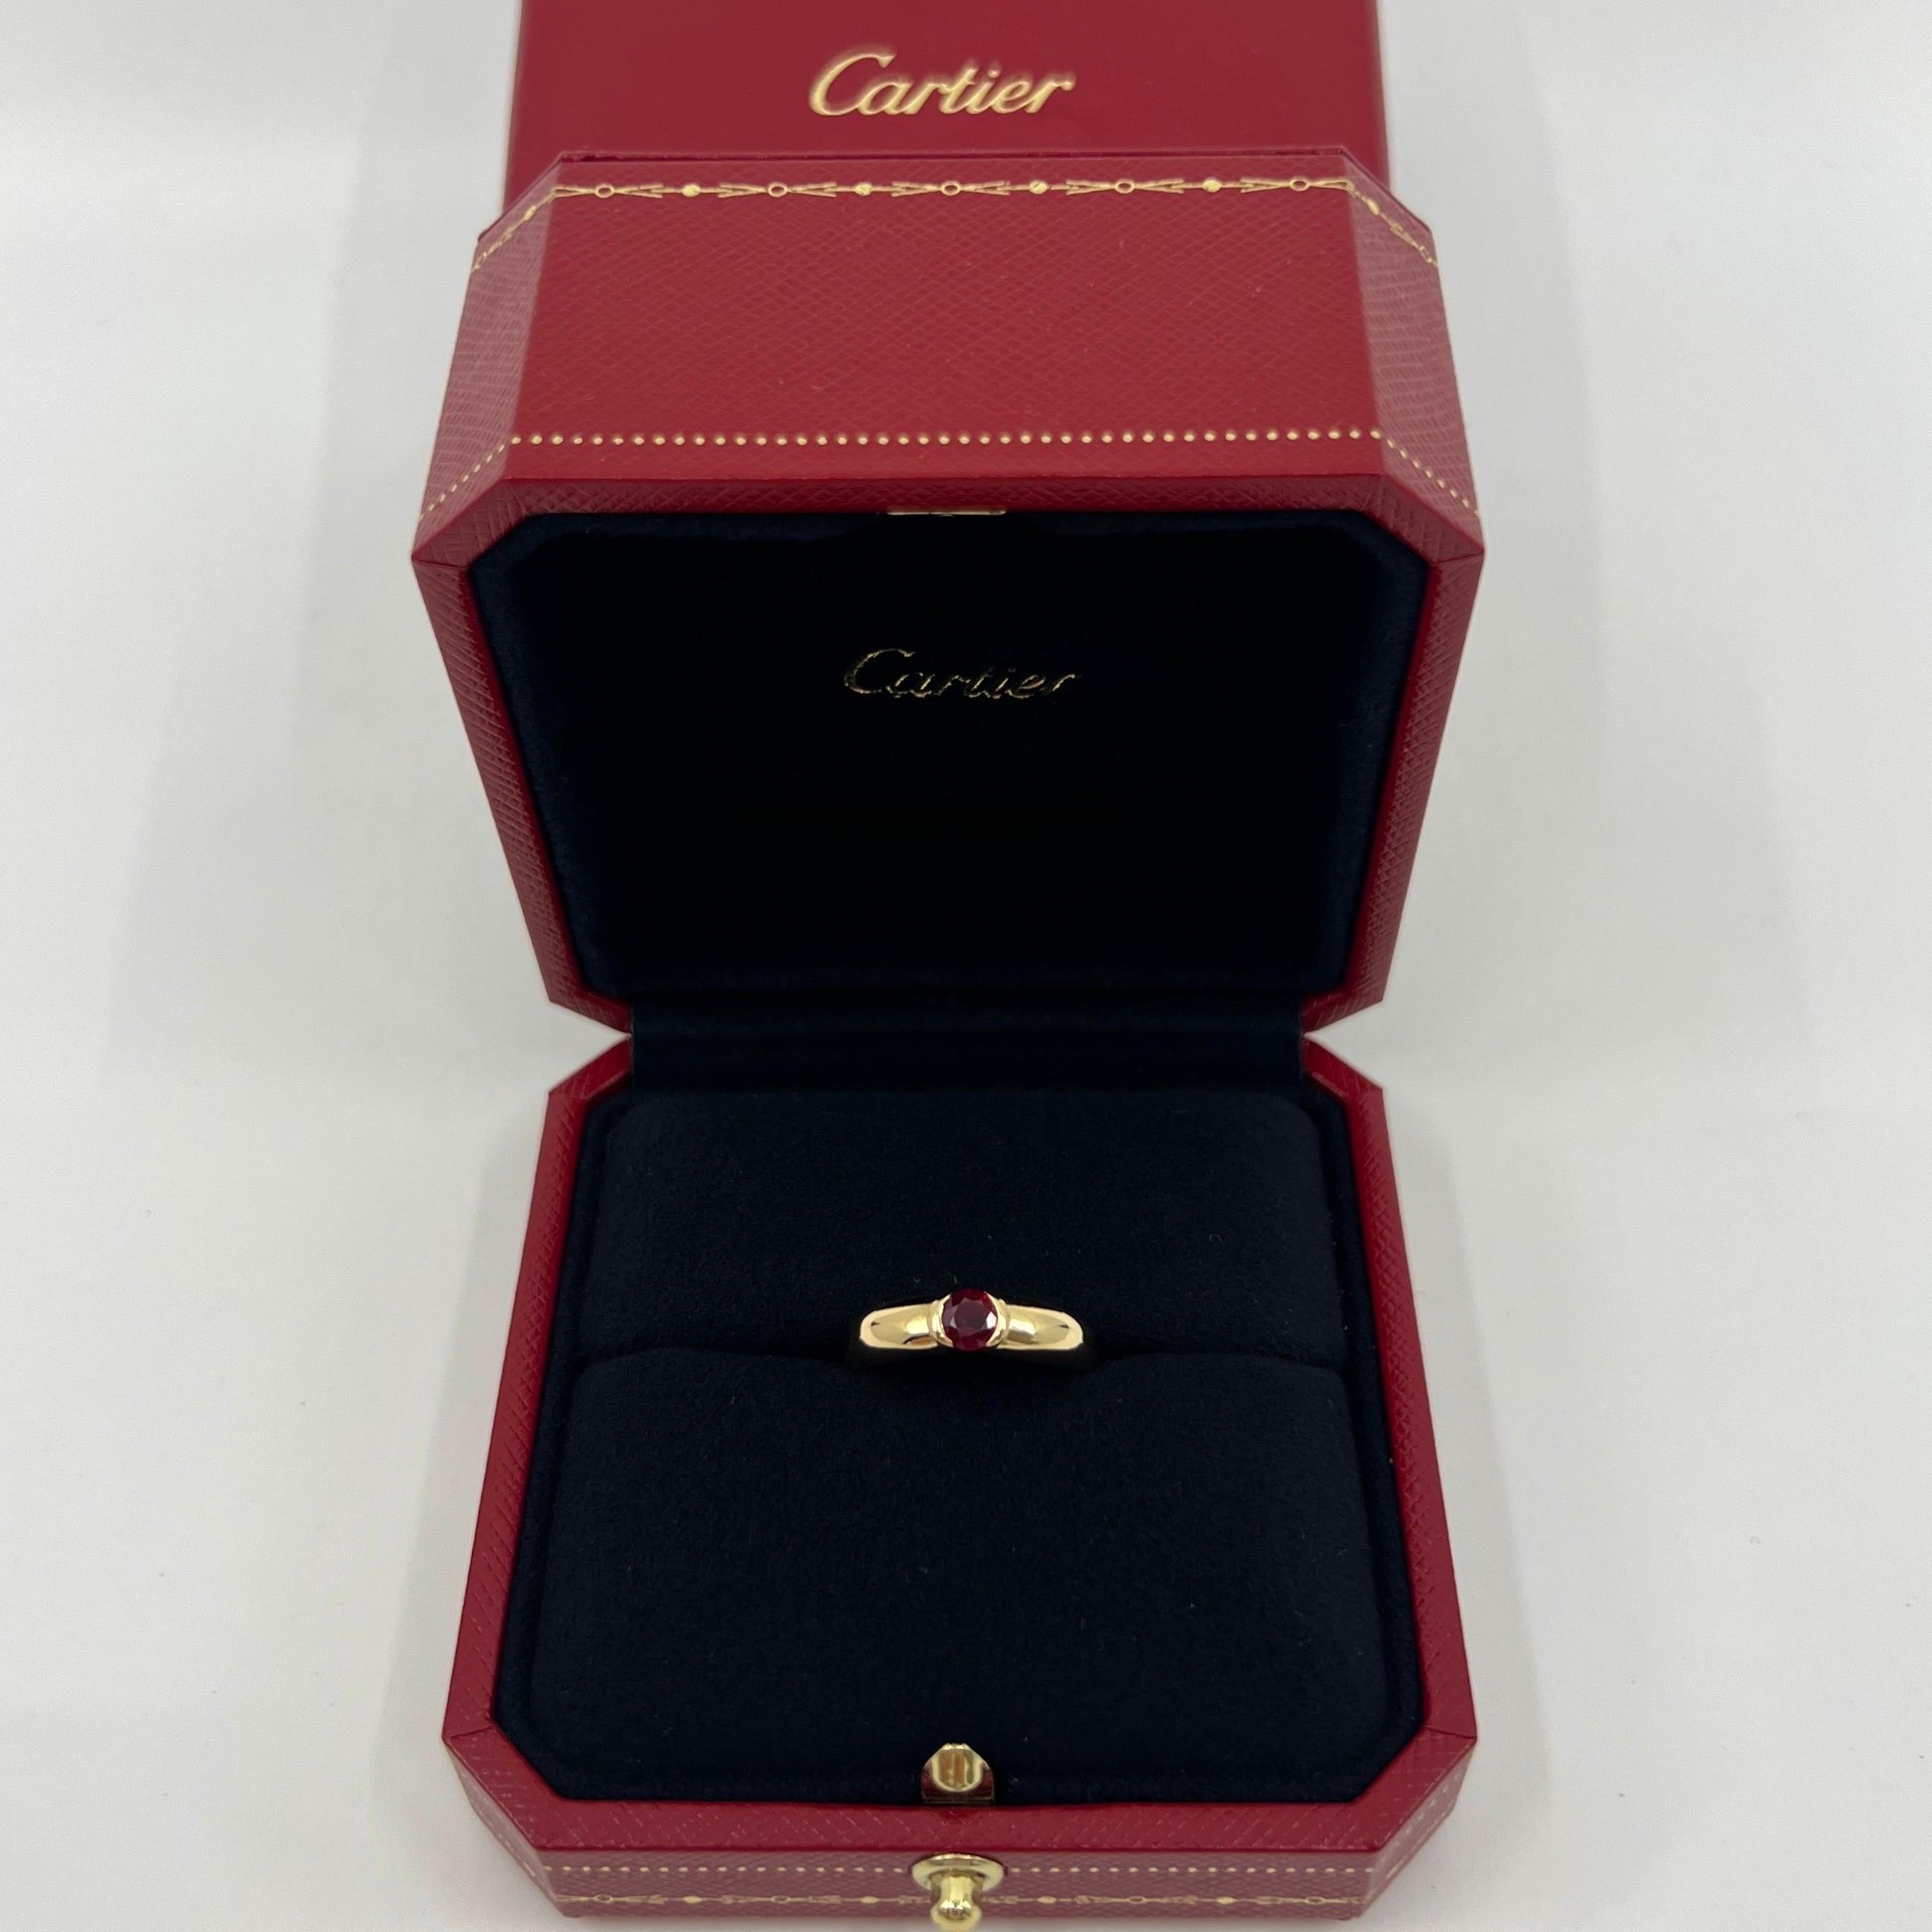 Vintage Cartier Round Cut Deep Red Ruby 18k Yellow Gold Solitaire Ring.

Stunning yellow gold ring set with a fine deep red ruby. Fine jewellery houses like Cartier only use the finest of gemstones and this ruby is no exception. An excellent quality